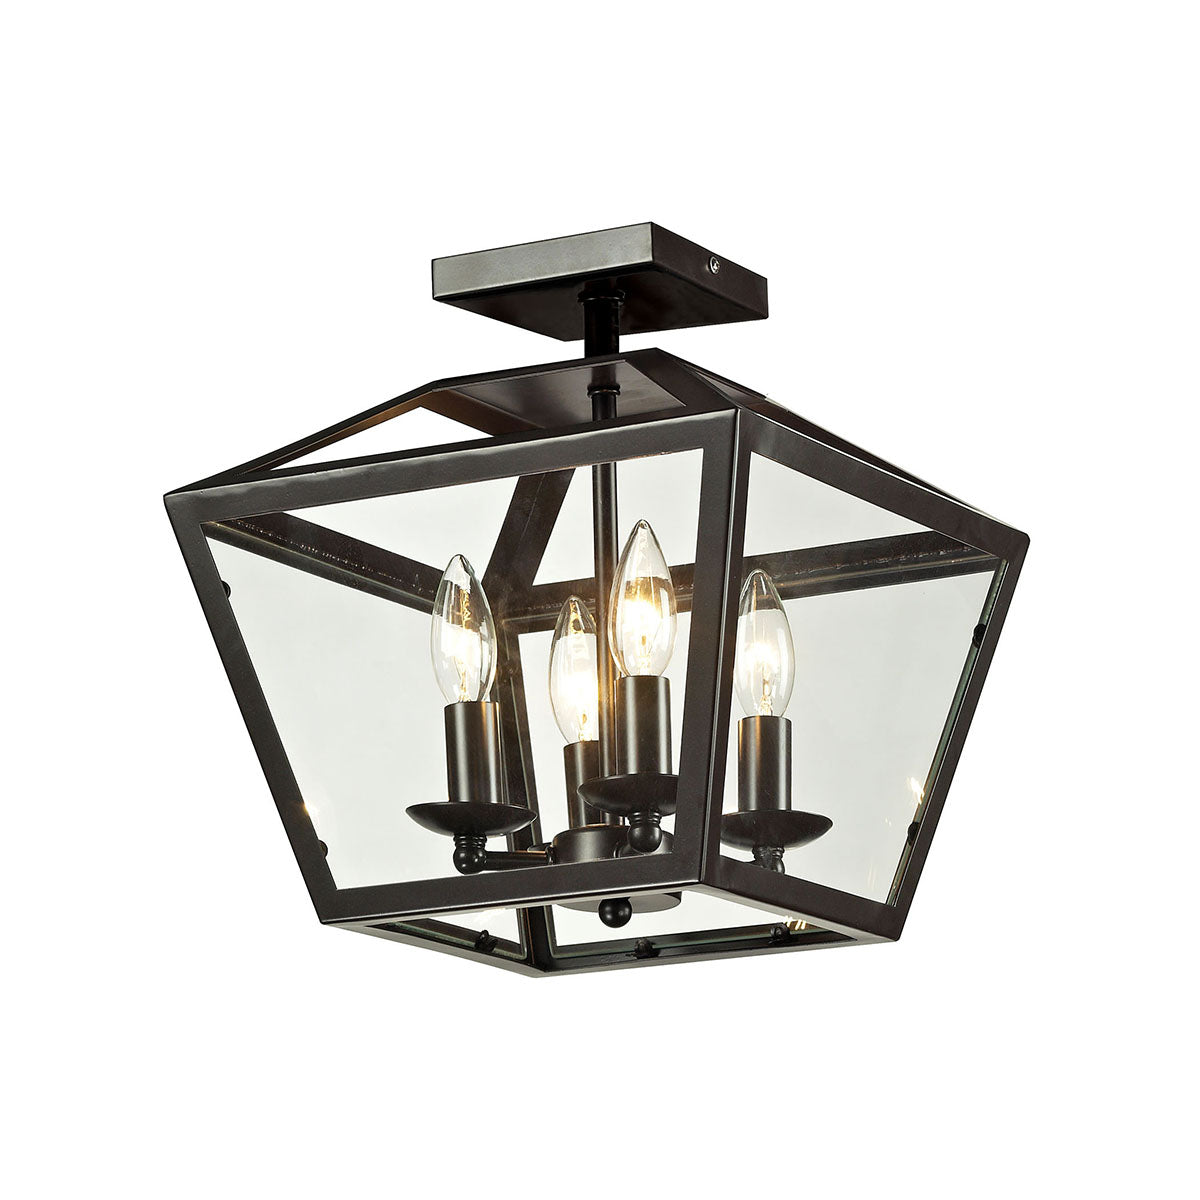 ELK Lighting 31506/4 Alanna 4-Light Semi Flush in Oil Rubbed Bronze with Clear Glass Panels